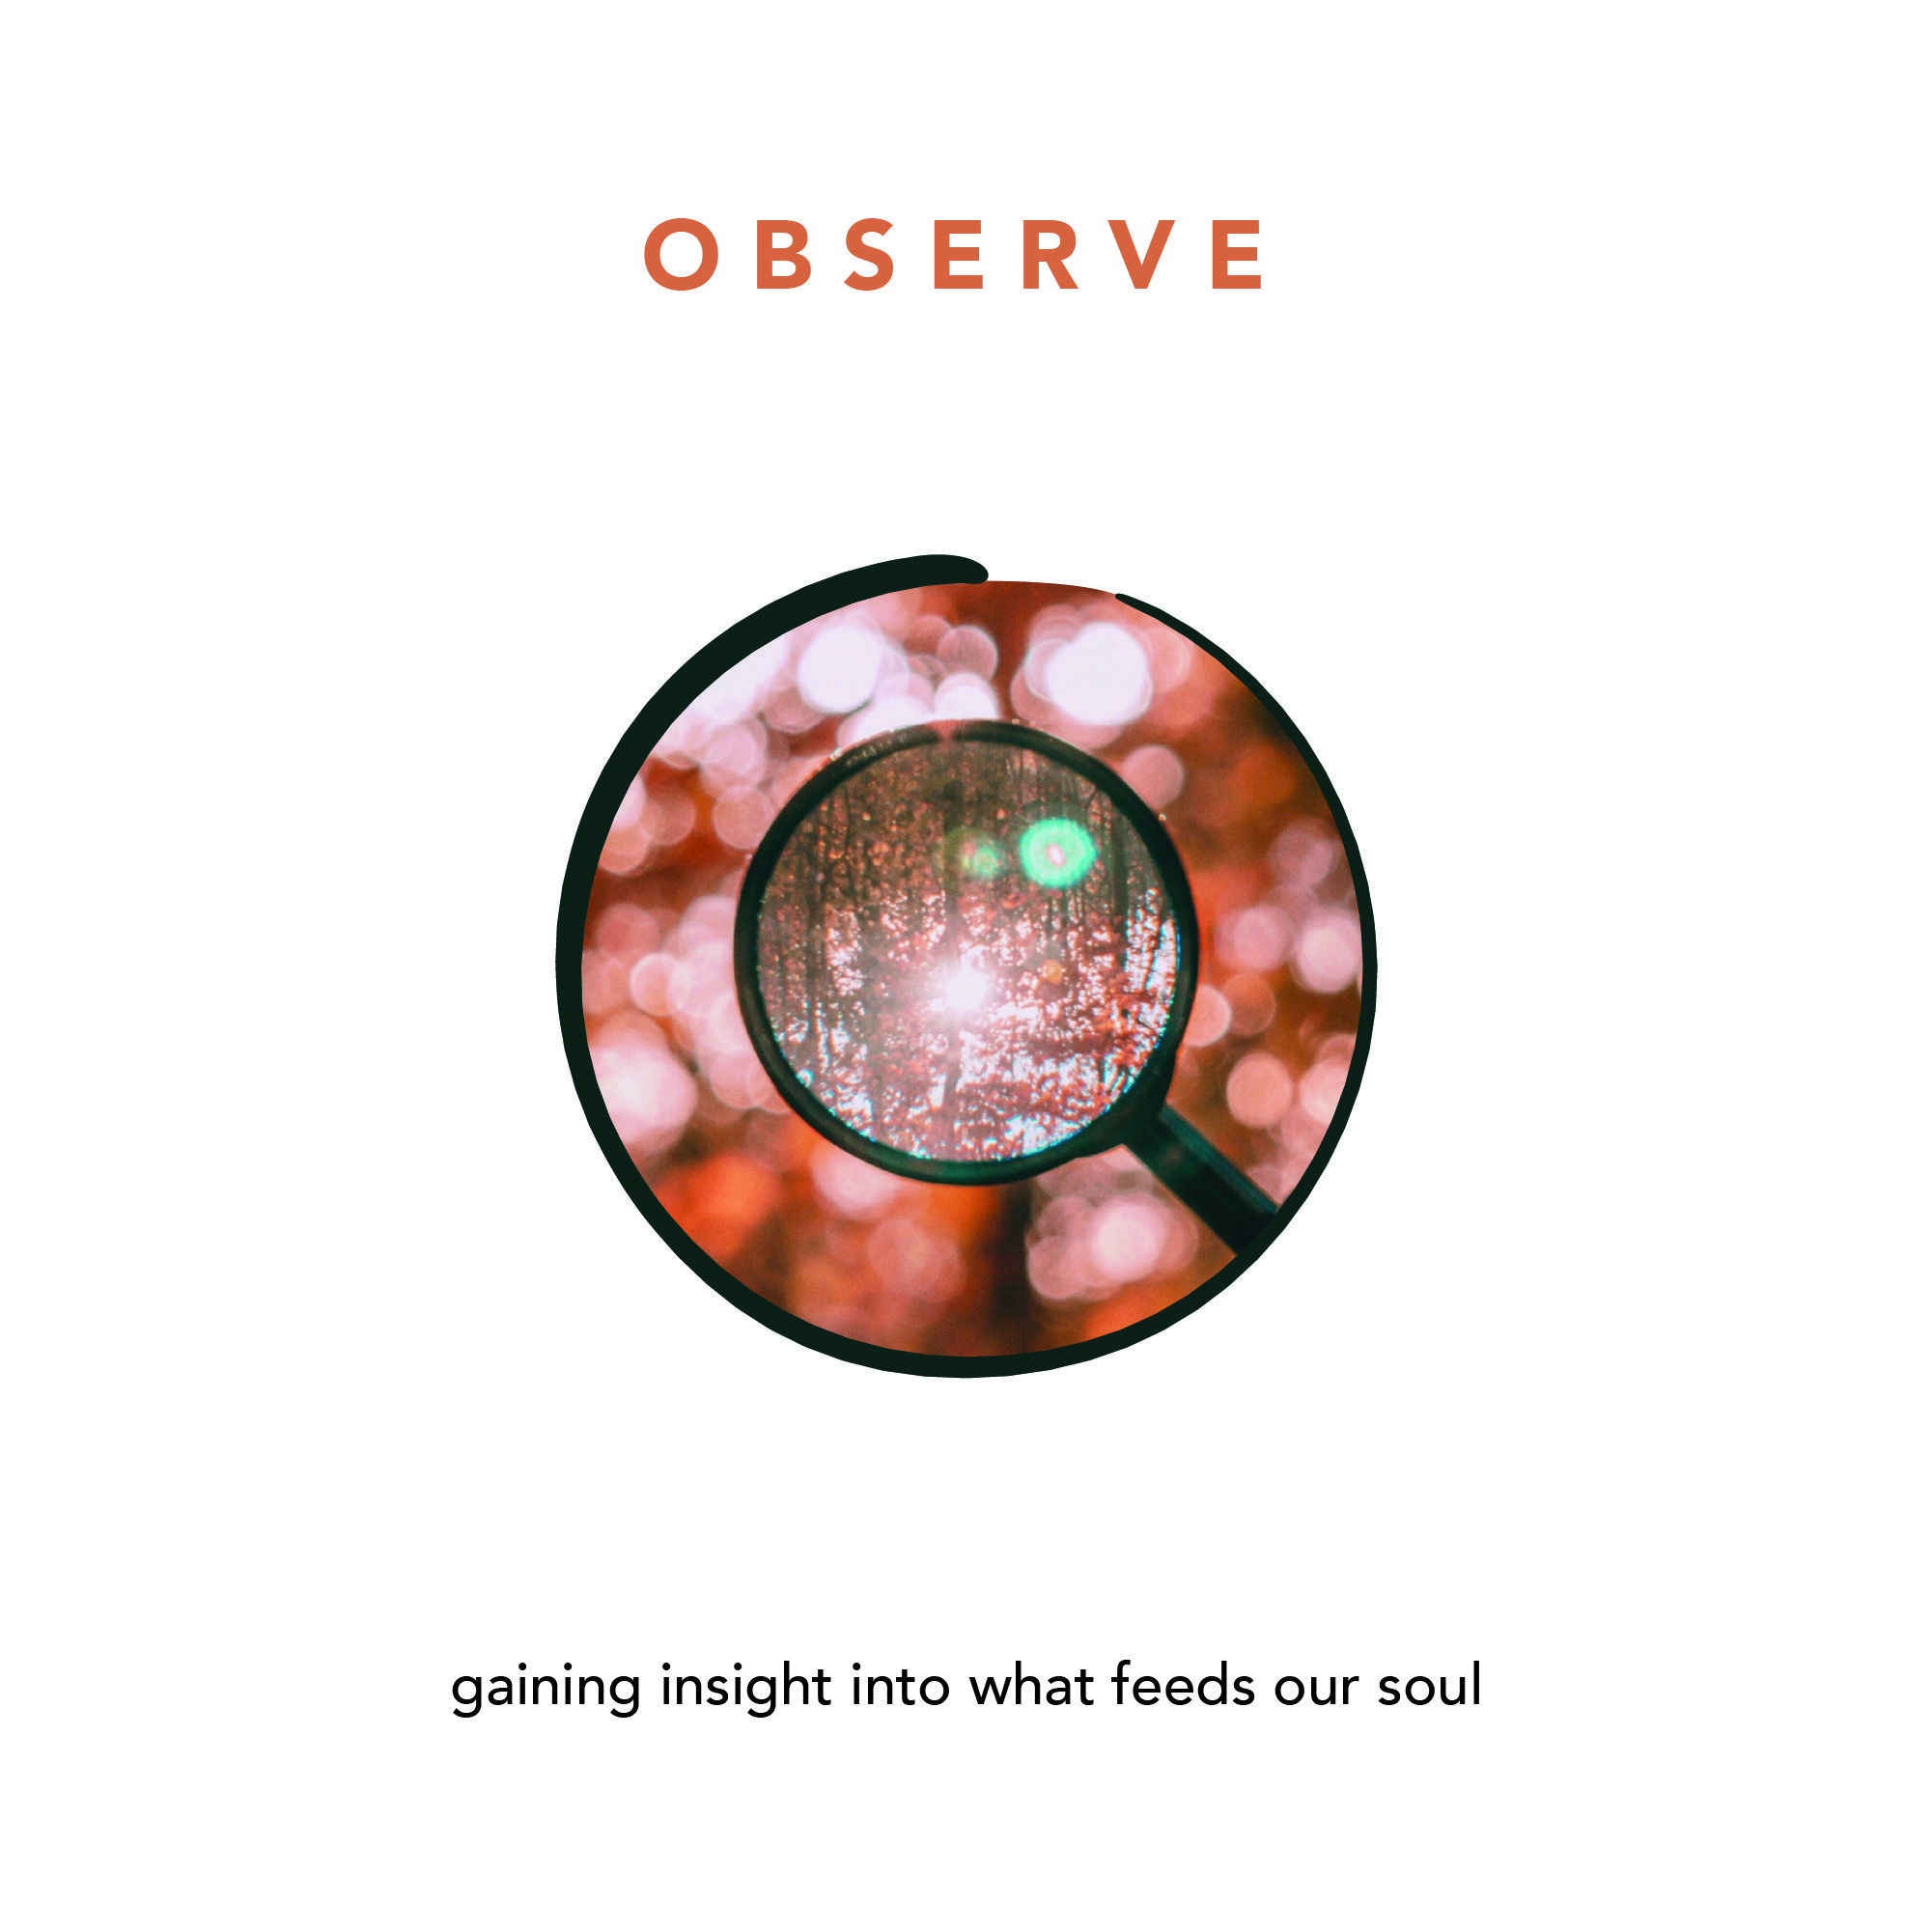 OBSERVE - gaining insight into what feeds our soul